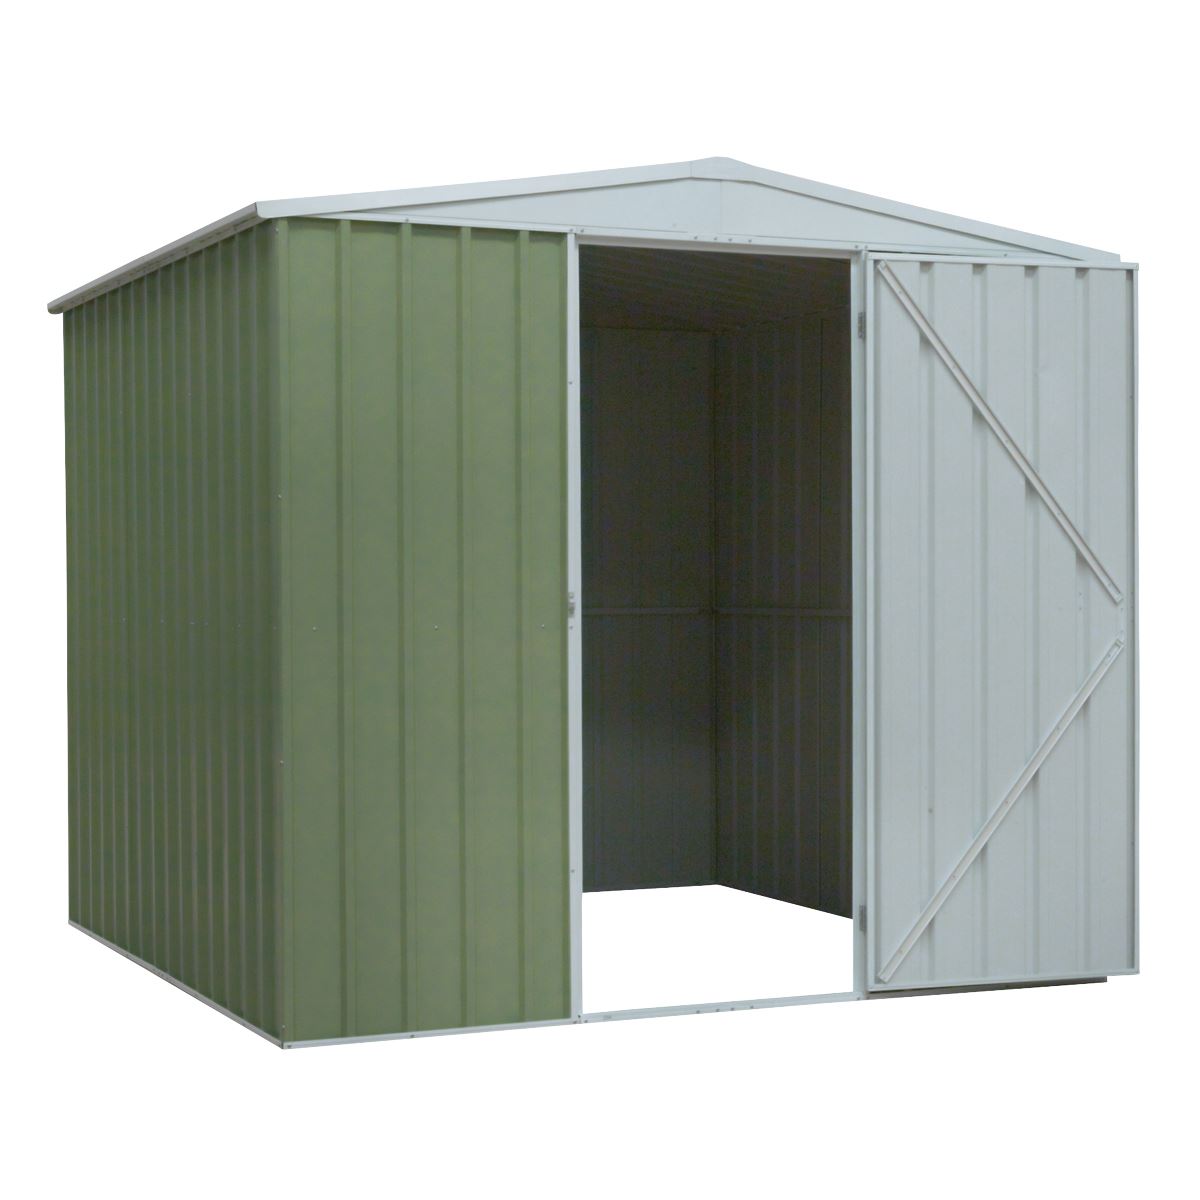 Dellonda Galvanised Steel Metal Garden/Outdoor/Storage Shed, 7.5FT x 7.5FT, Apex Style Roof - Green